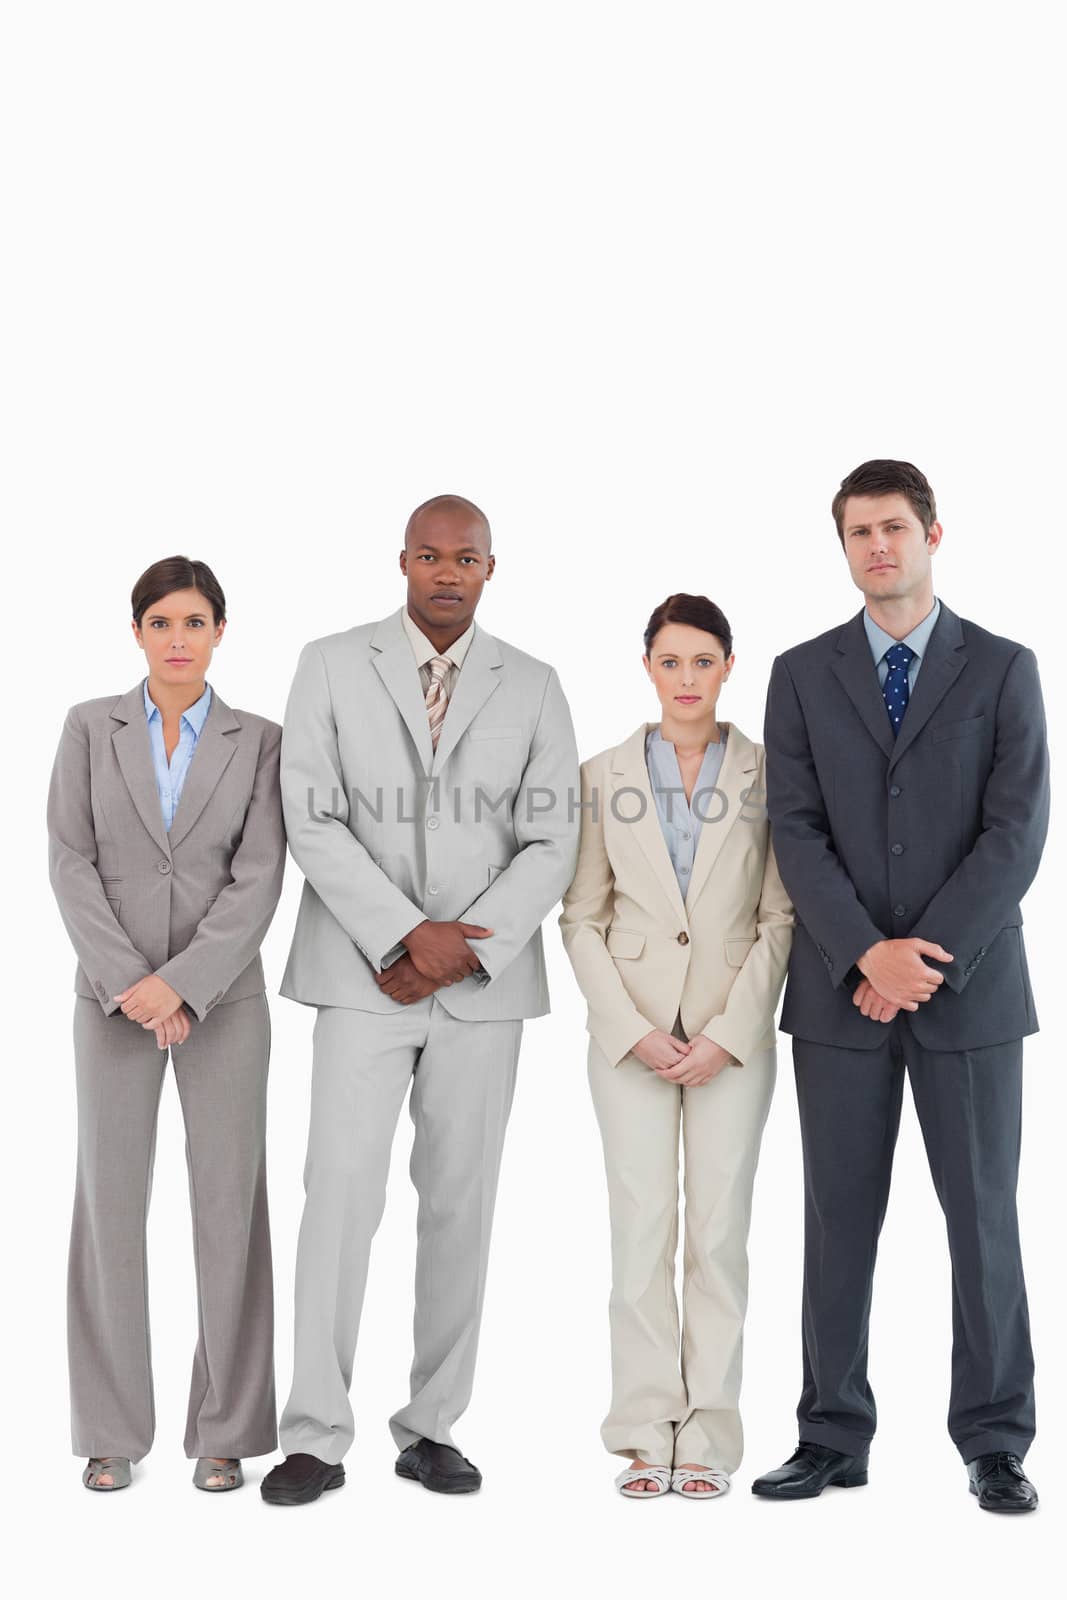 Confident young businessteam standing together against a white background